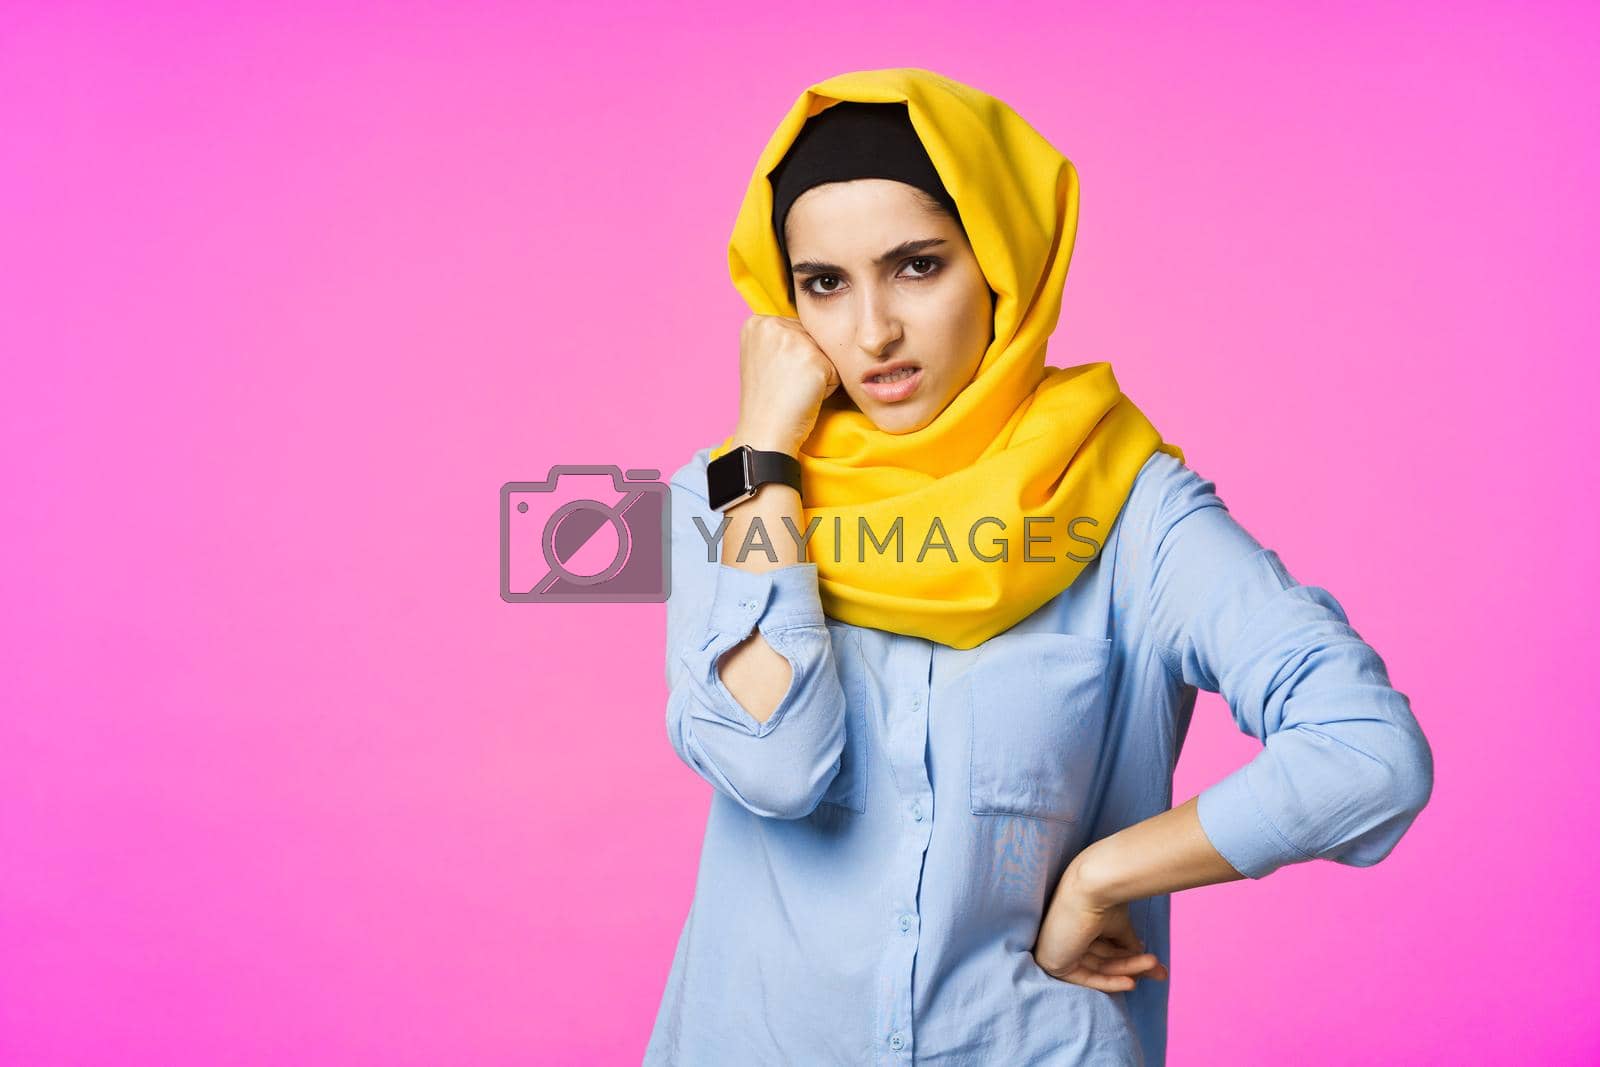 Royalty free image of cheerful woman in yellow hijab electronic watch technology user pink background by Vichizh